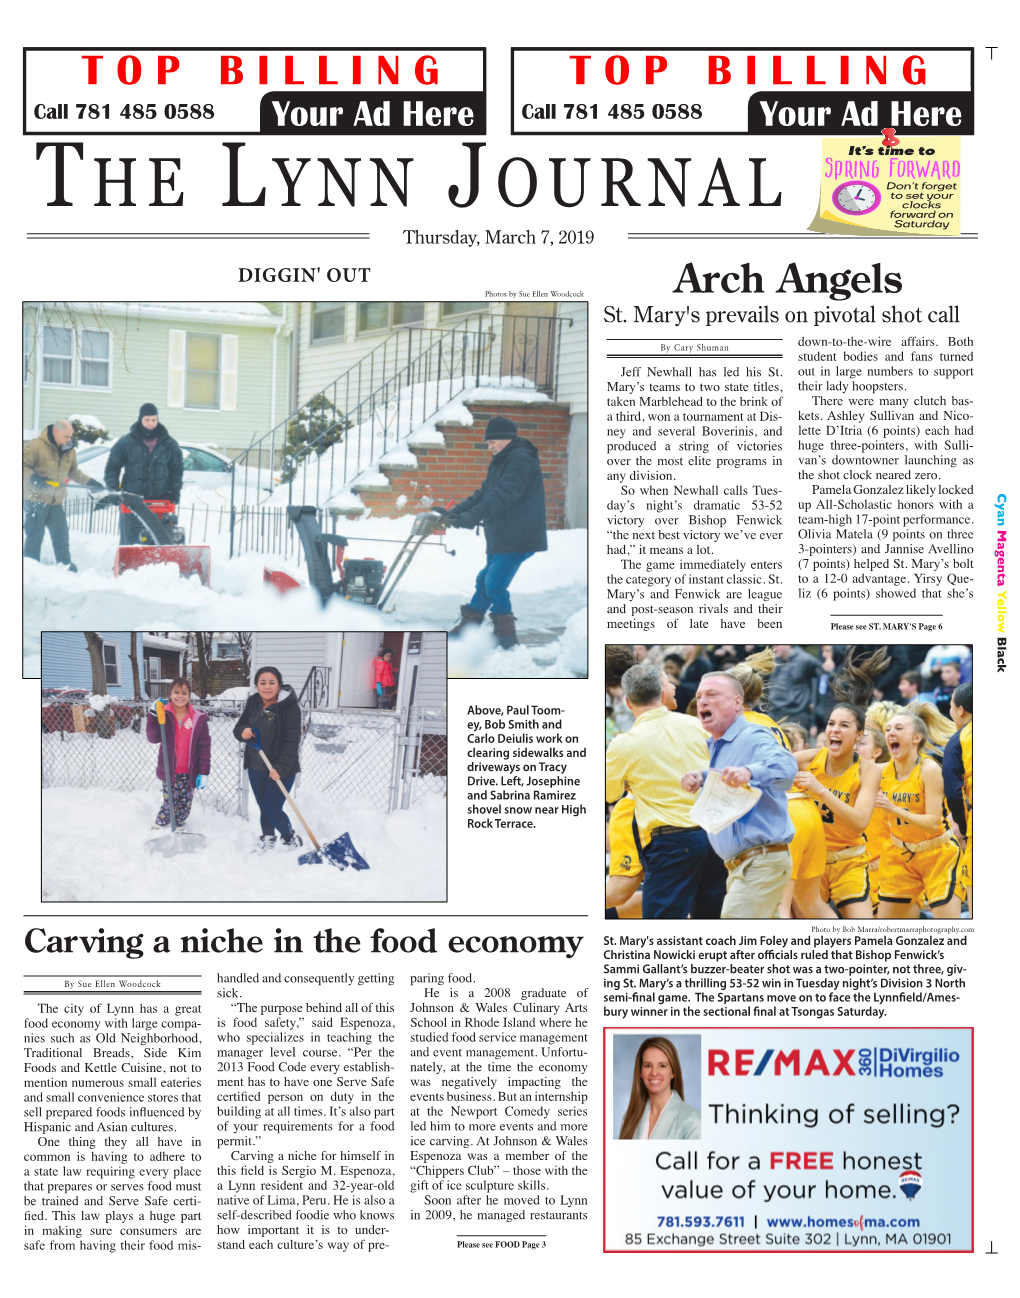 THE LYNN JOURNAL Can Be Picked up at These Locations Every Thursday